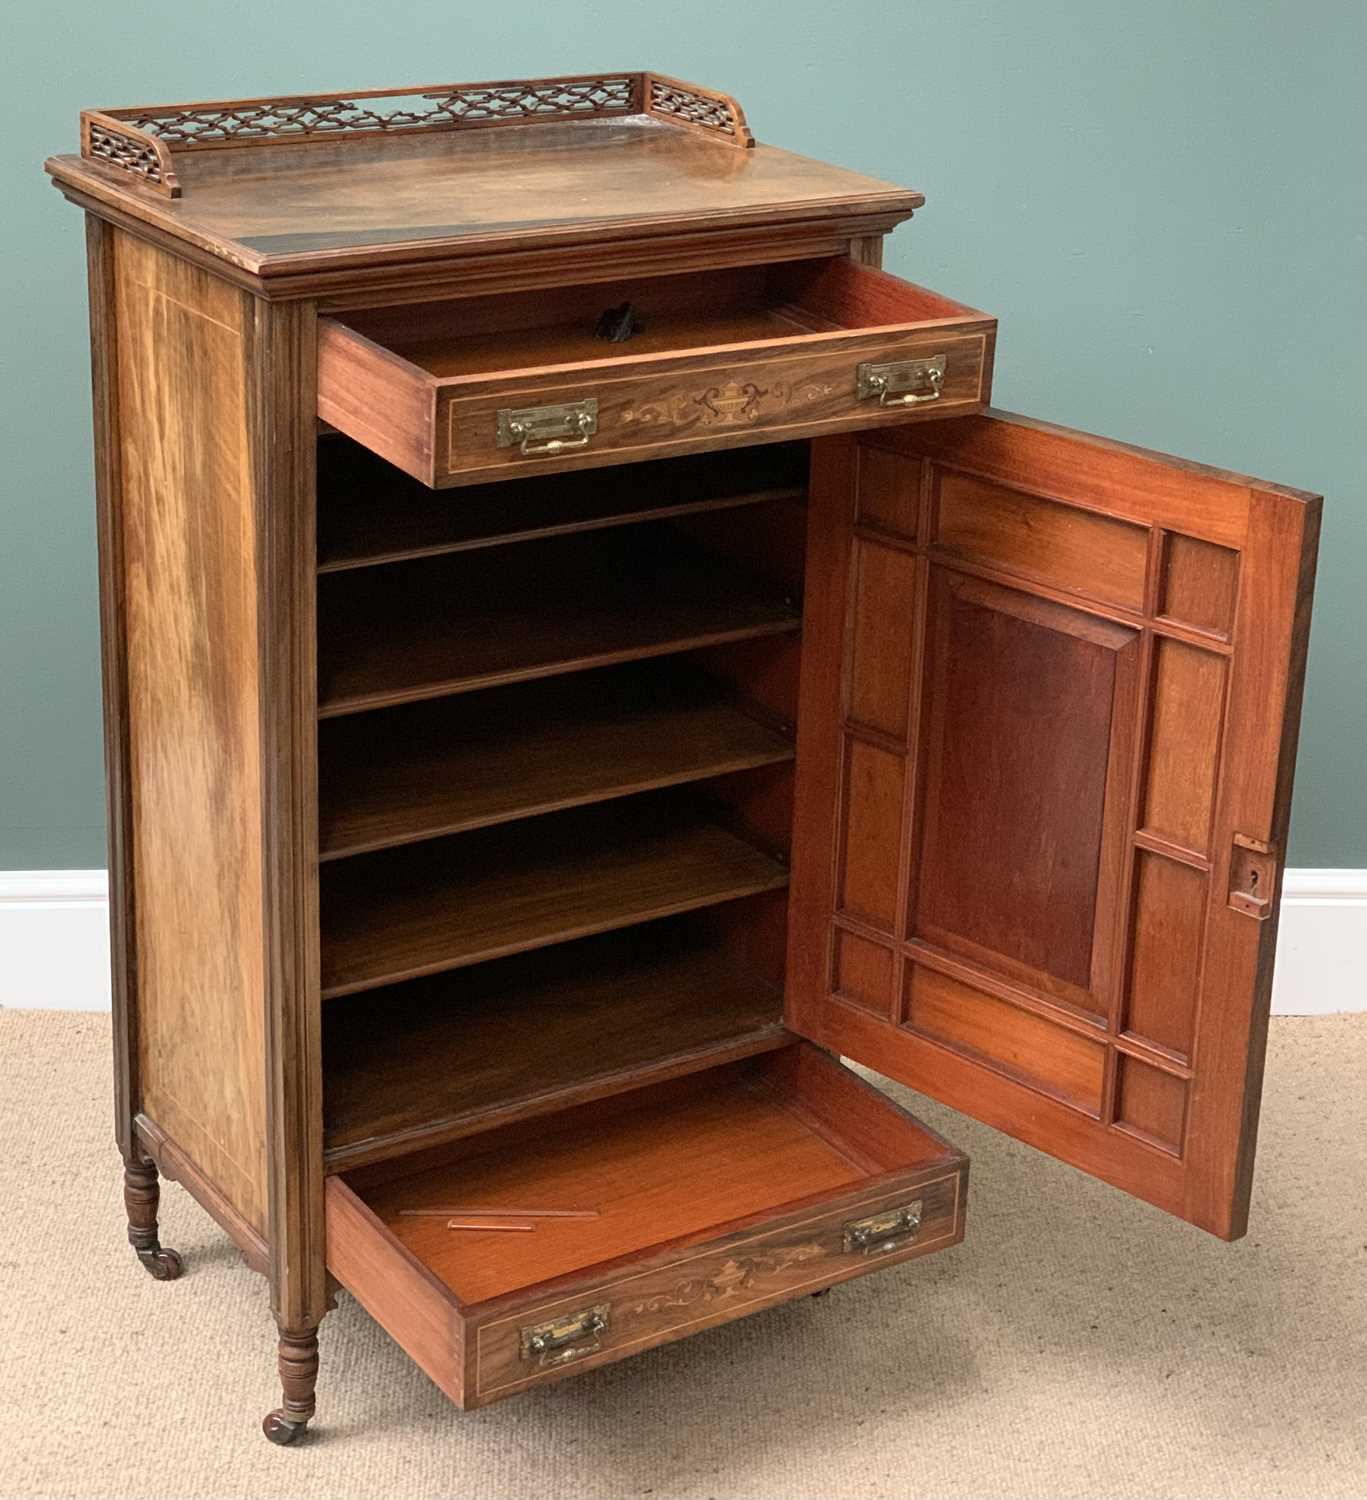 WALNUT MUSIC SHEET CABINET with fretwork gallery to the top and single door with bevelled glass